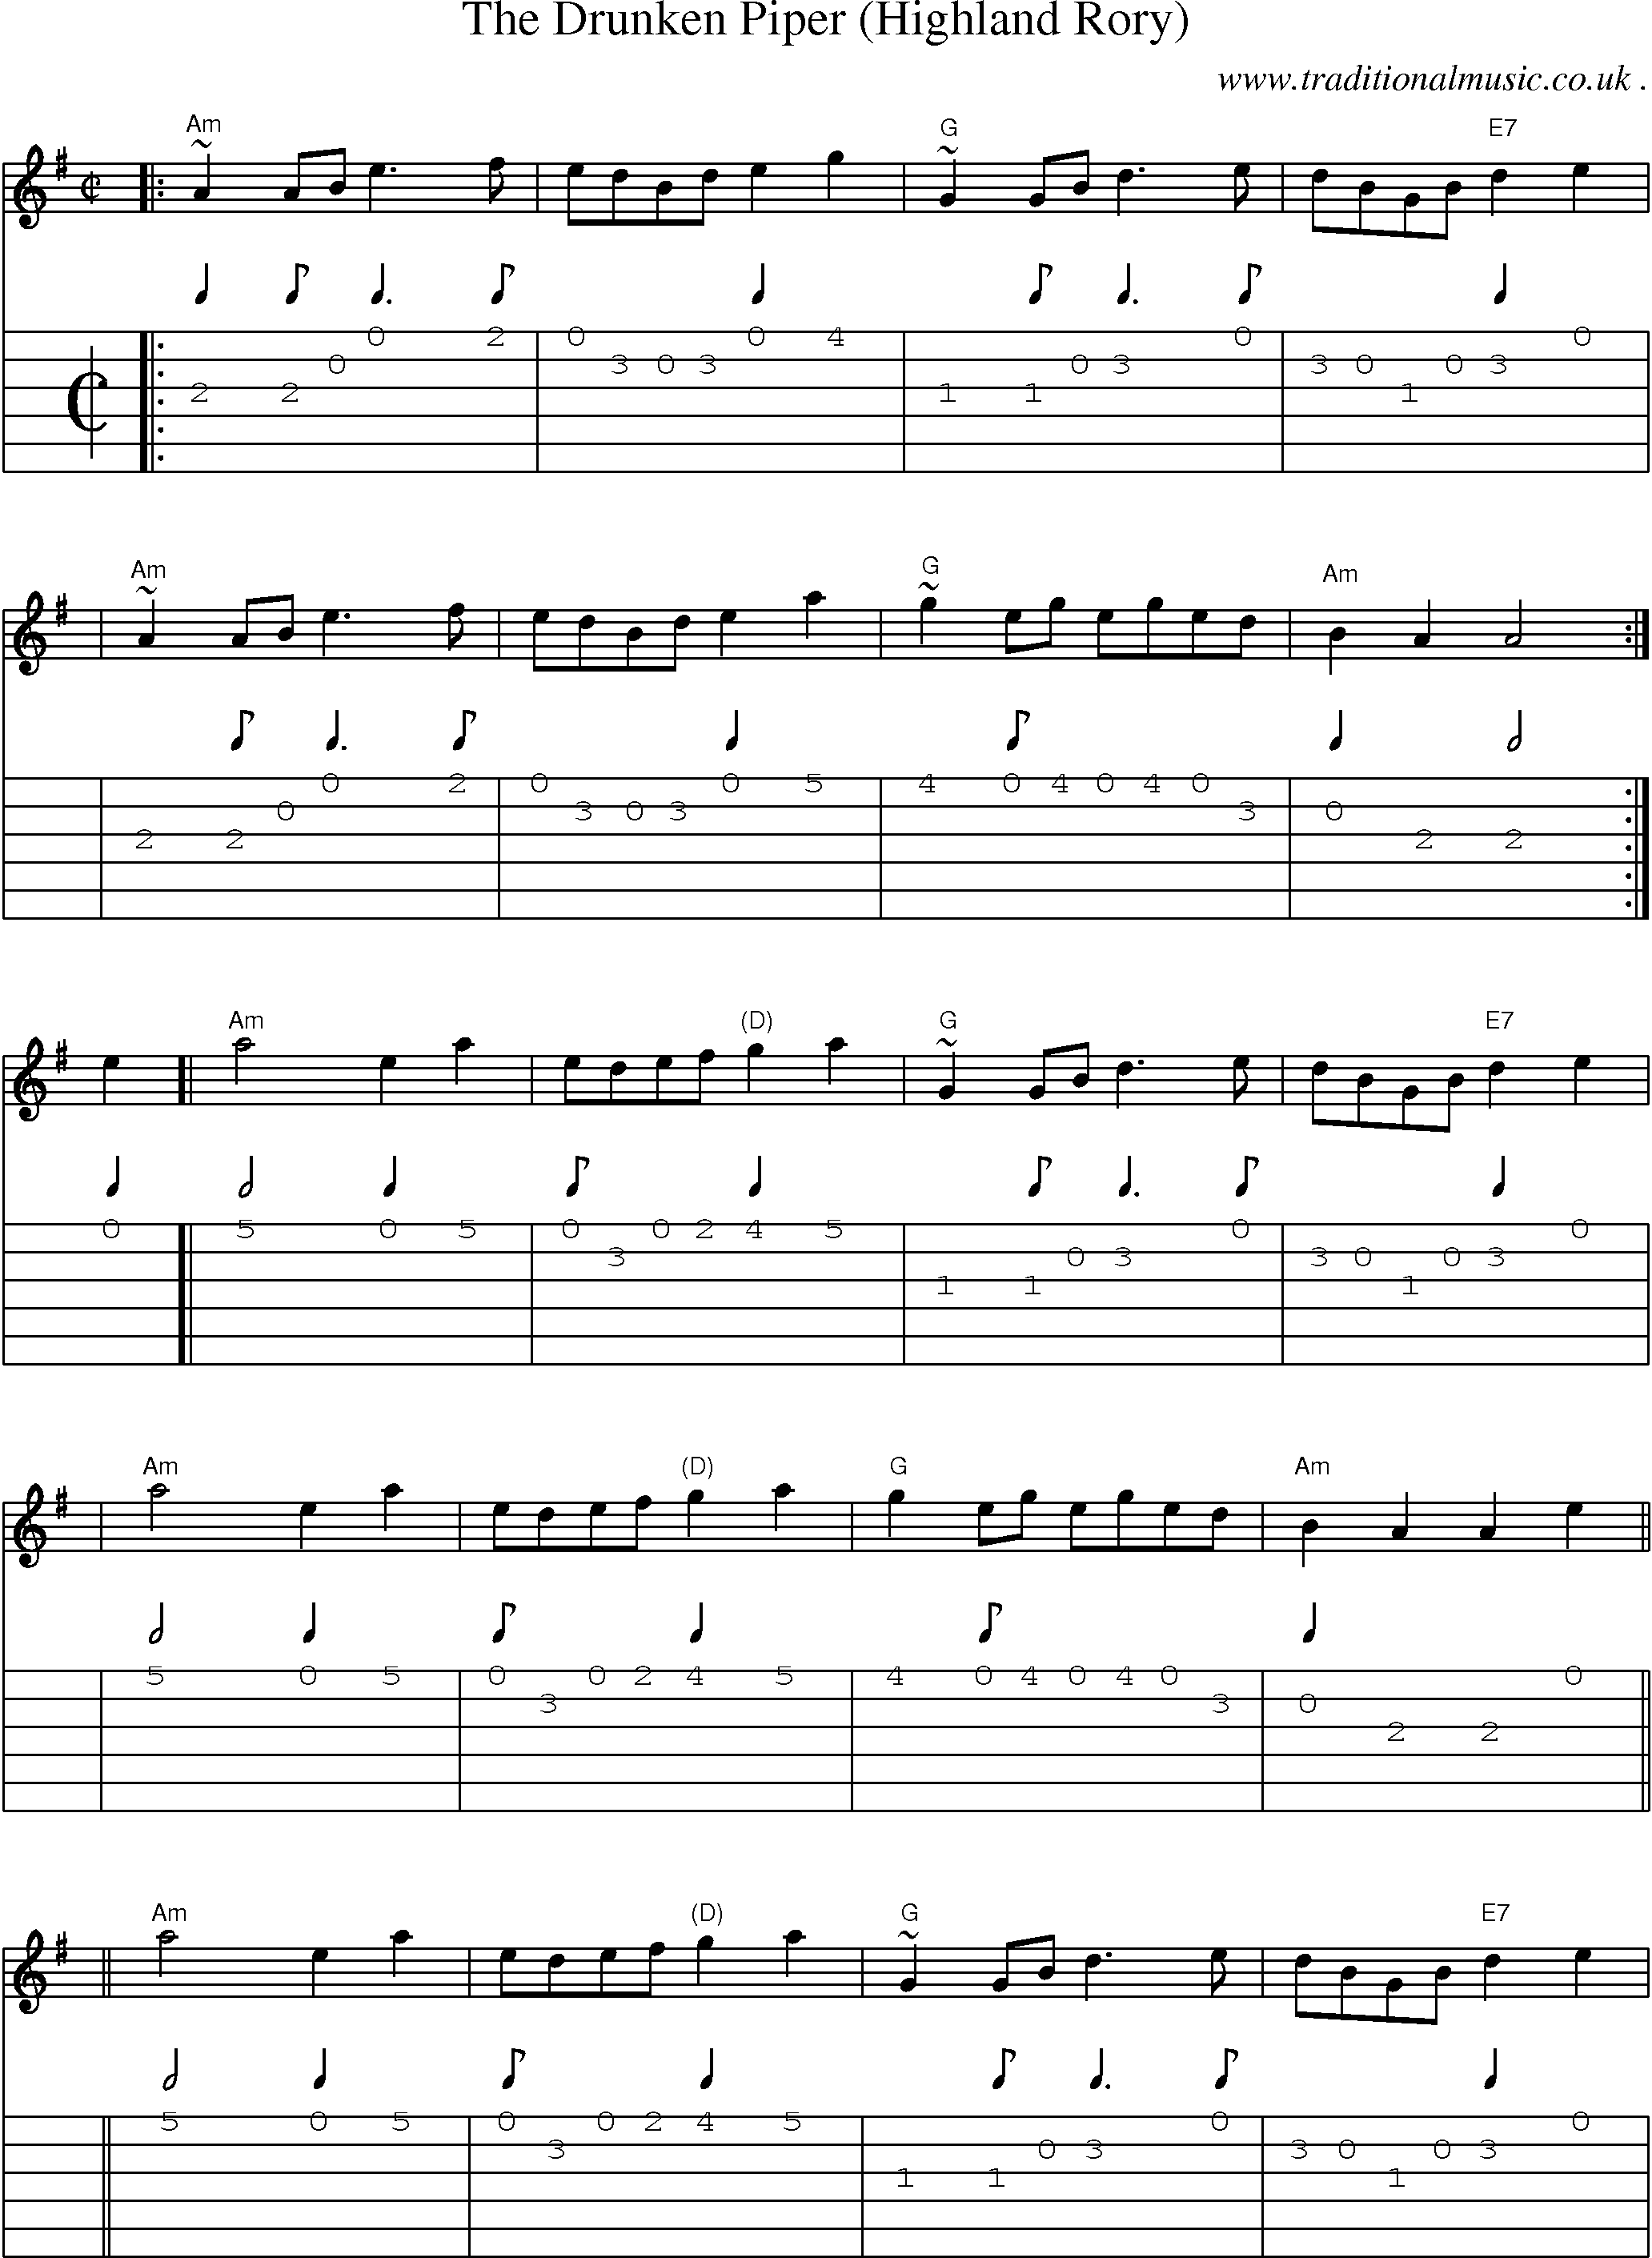 Sheet-music  score, Chords and Guitar Tabs for The Drunken Piper Highland Rory